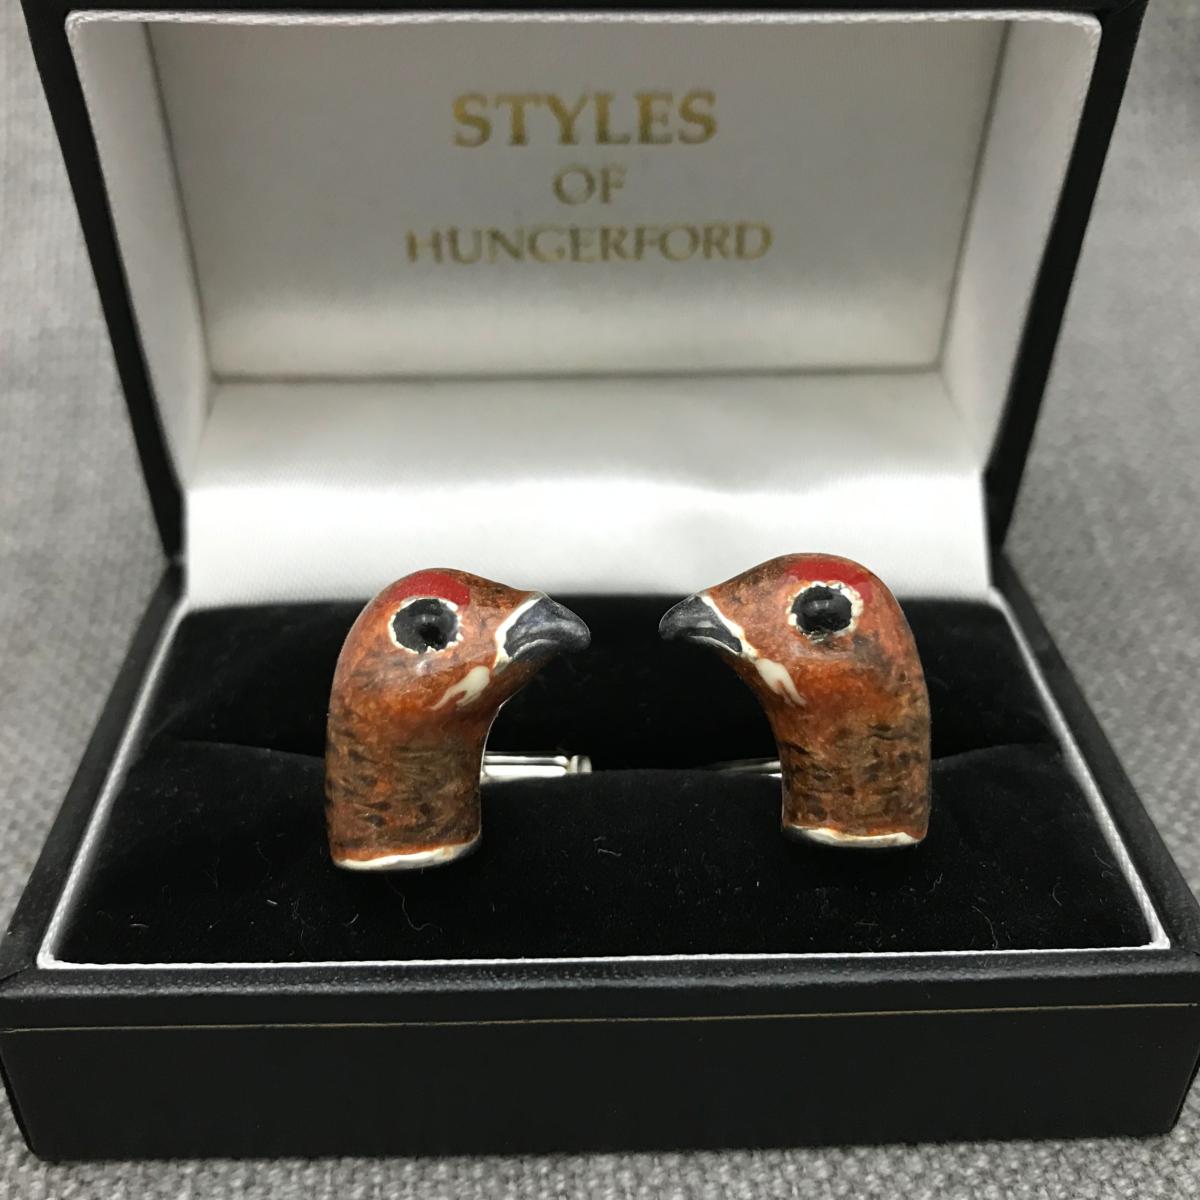 SATURNO Silver & Enamel GROUSE CUFFLINKS - STYLES SILVER of HUNGERFORD